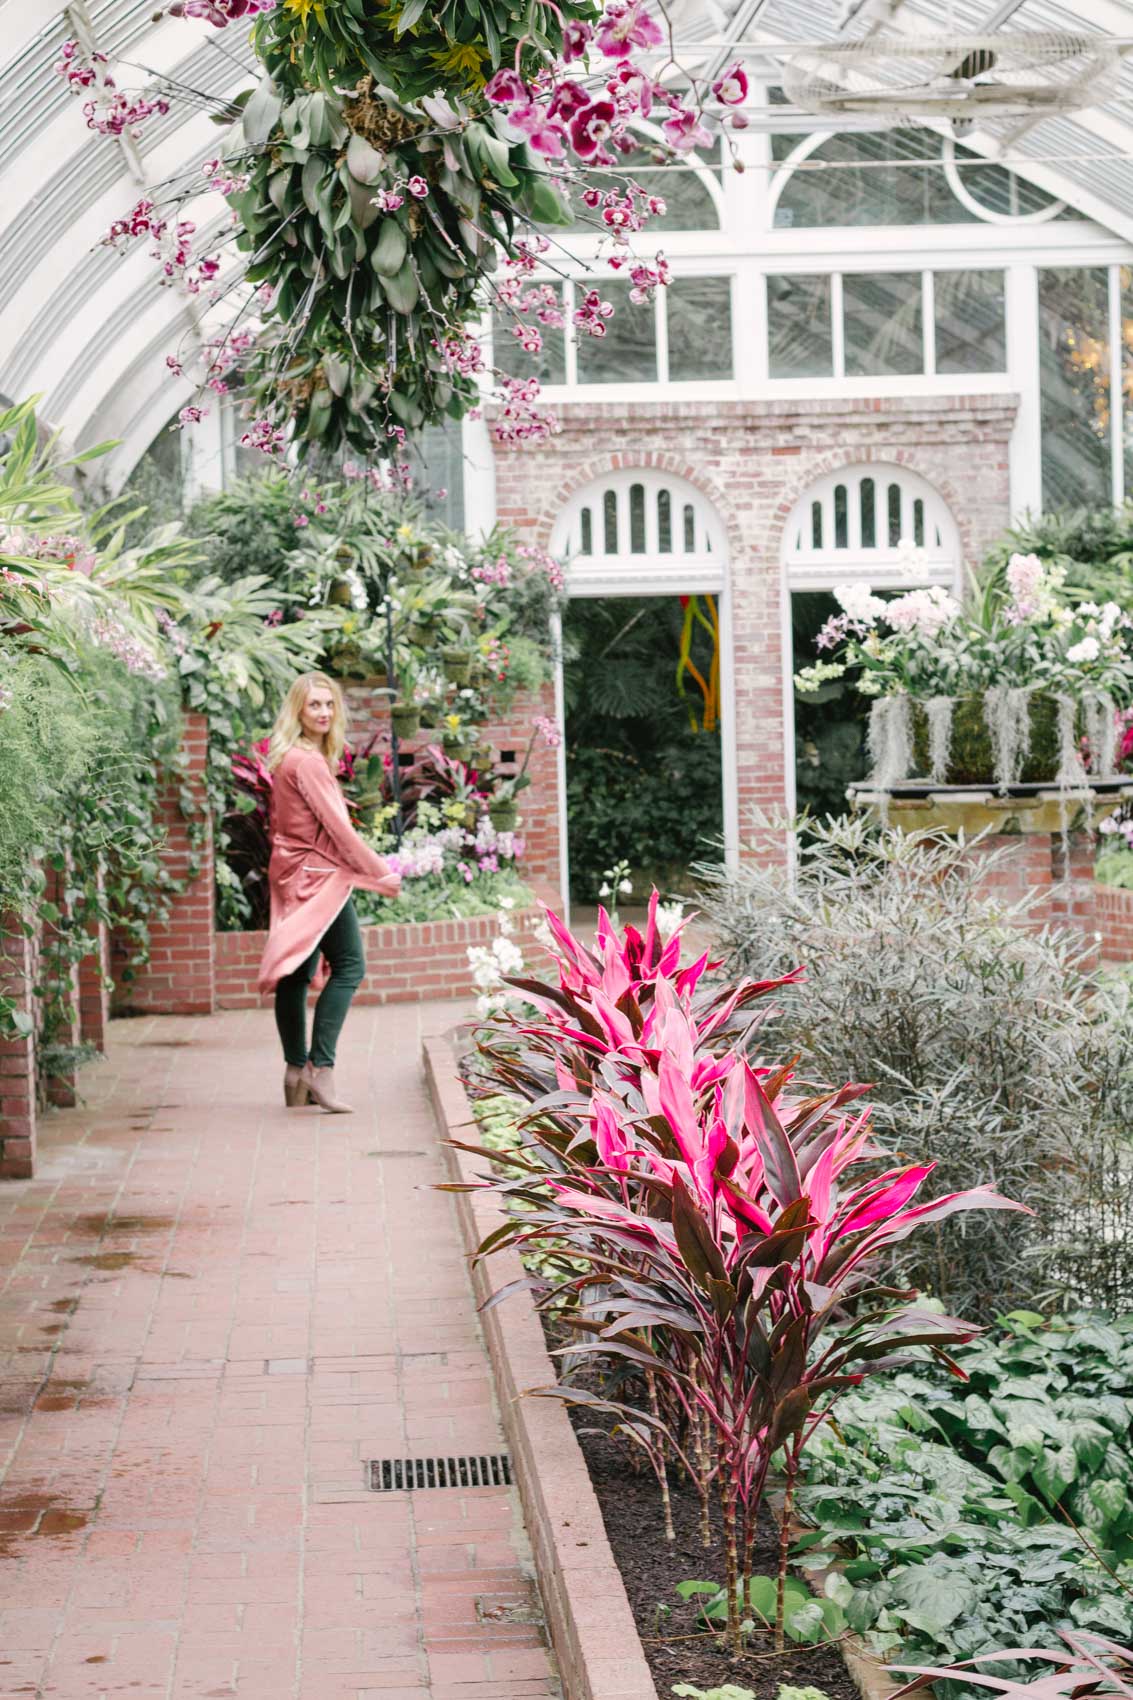 The cravings for the feelings that spring and summer give us are nearly insatiable during the fall and winter months, but we found a delightful sliver of that feeling at Phipps Conservatory and Botanical Gardens! There are no words to do it justice (photos help), so we strongly encourage planning your own visit!